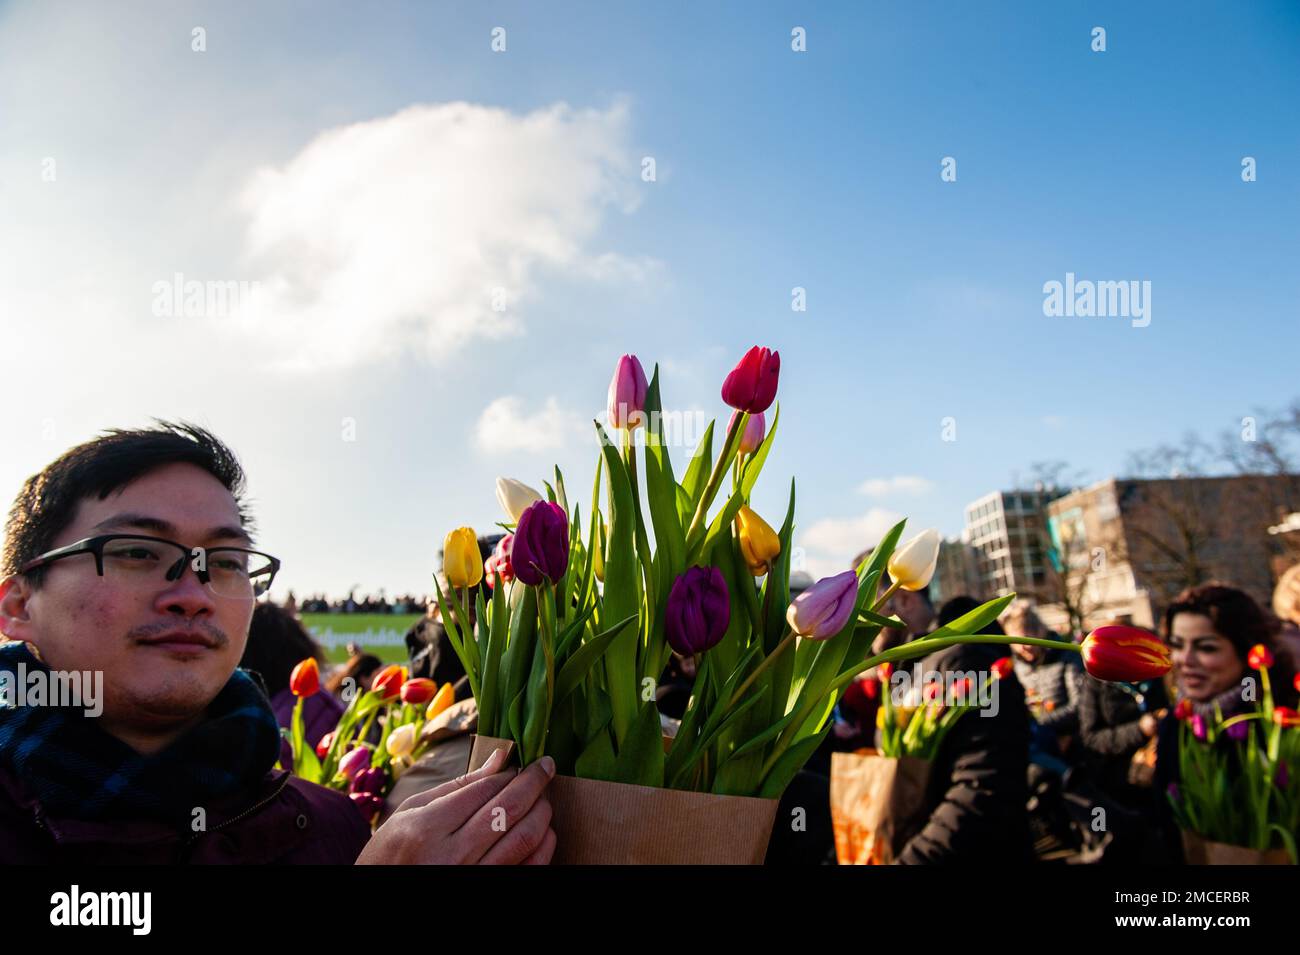 A man seen walking with a bag full of tulips. Each year on the 3rd Saturday of January, the National Tulip Day is celebrated in Amsterdam. Dutch tulip growers built a huge picking garden with more than 200,000 colorful tulips at the Museumplein in Amsterdam. Visitors are allowed to pick tulips for free. The event was opened by Olympic skating champion, Irene Schouten. Prior to the opening, she christened a new tulip: Tulipa 'Dutch Pearl' as a reference to the world - famous painting 'The girl with a pearl earring' by Johannes Vermeer. Stock Photo